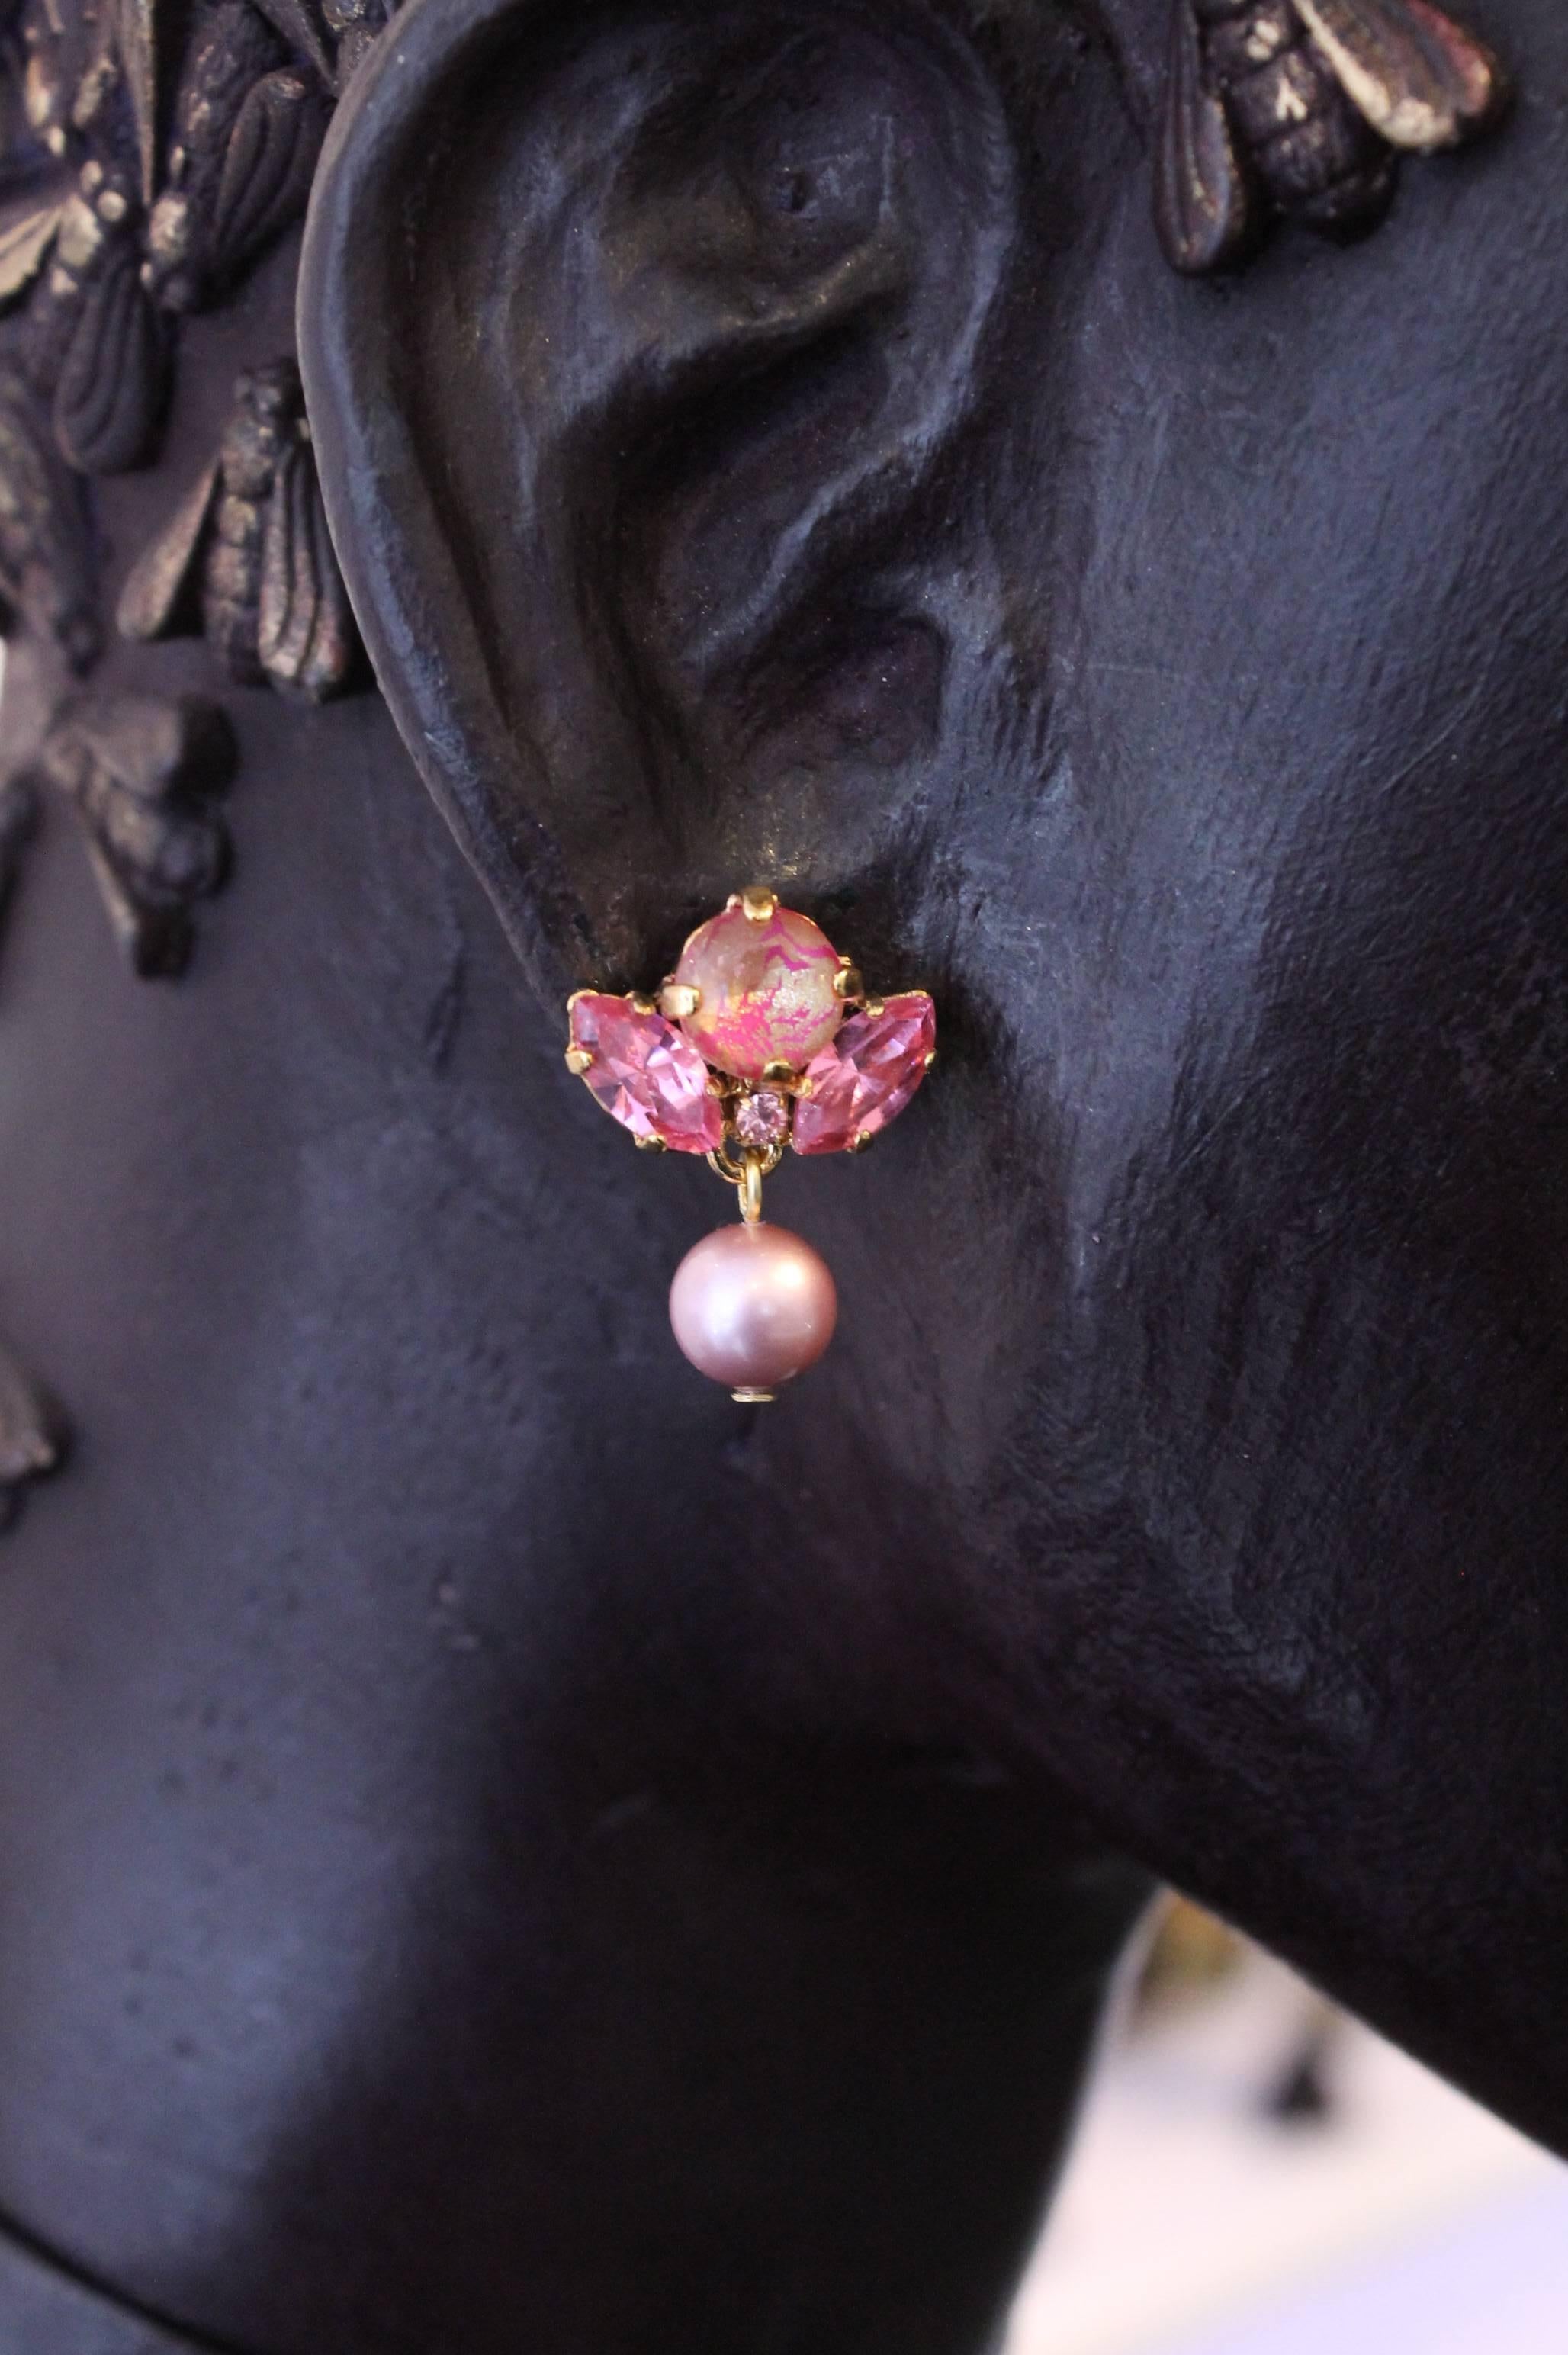 One-of-a-kind delicate drop earrings, featuring hand-enamelled Swarovski crystals, making each earring utterly unique. 

This small, charming style is flattering to all - and this stunning combination of pink Swarovski crystals, pink pearls and gold